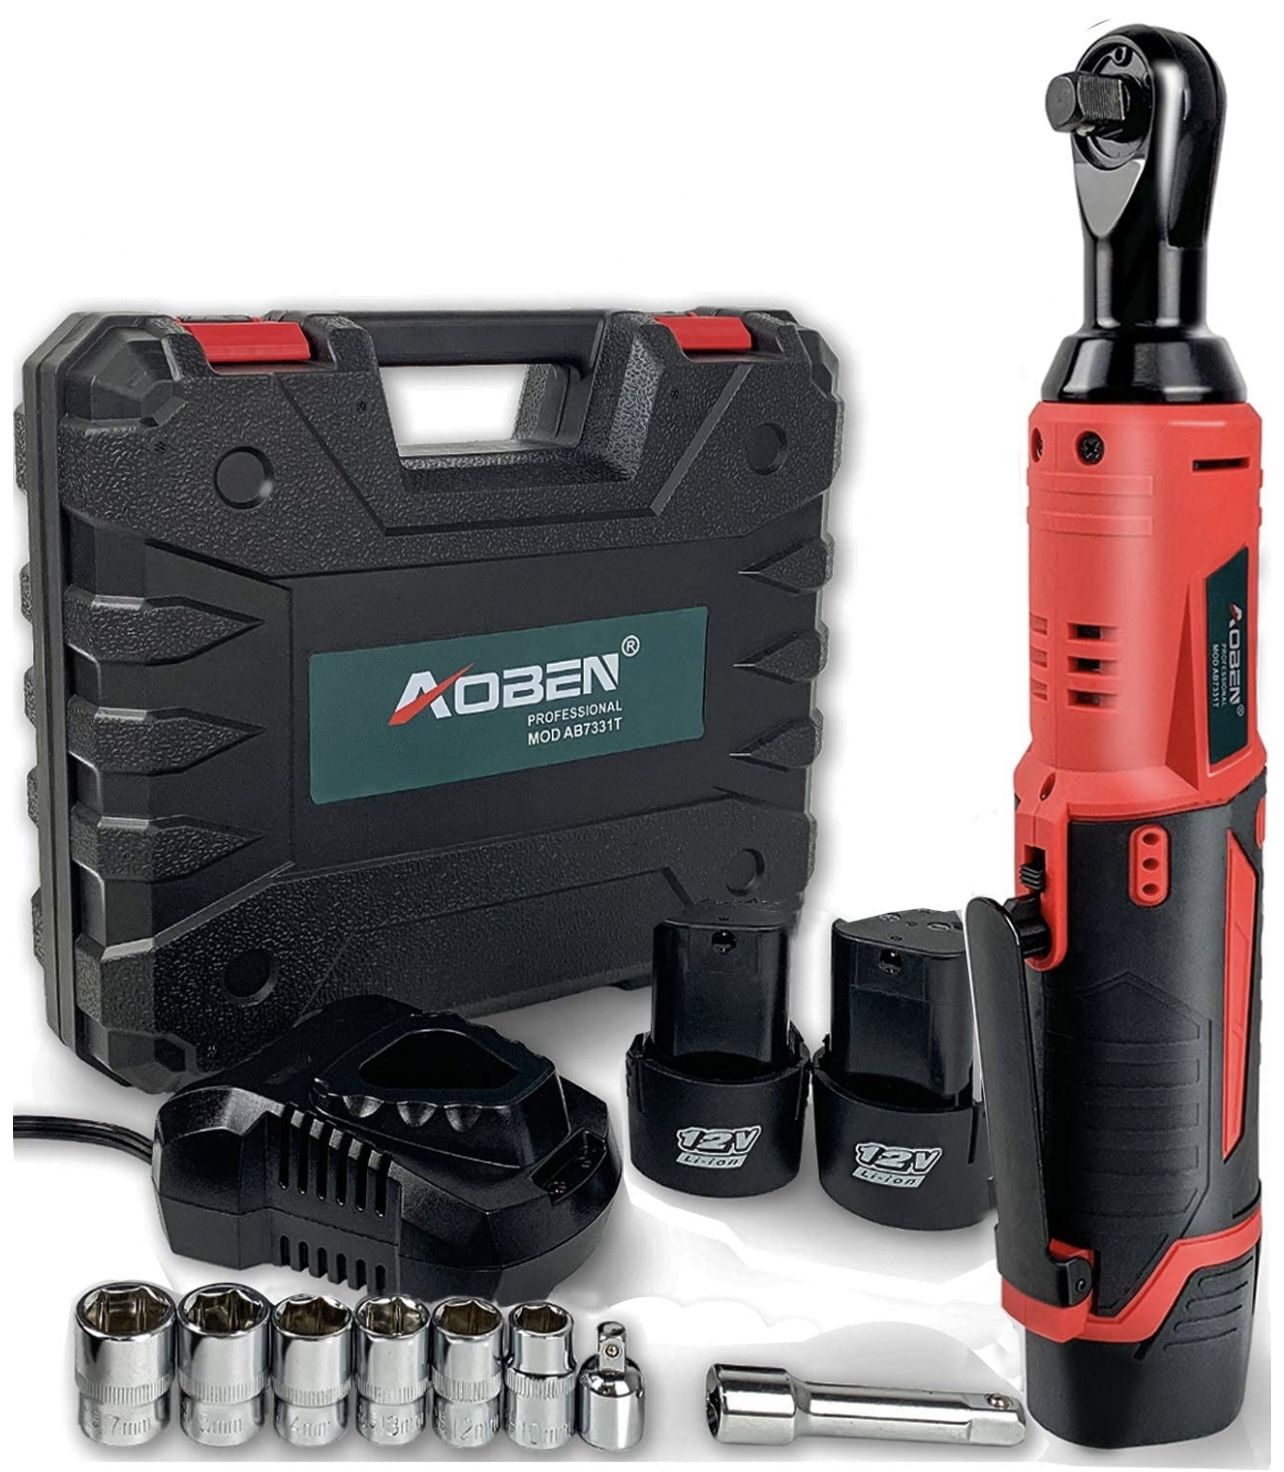 Cordless Electric Ratchet Wrench Set, AOBEN 3/8" 12V Power Ratchet Tool Kit With 2 Packs 2000mAh Lithium-Ion Battery And Charger